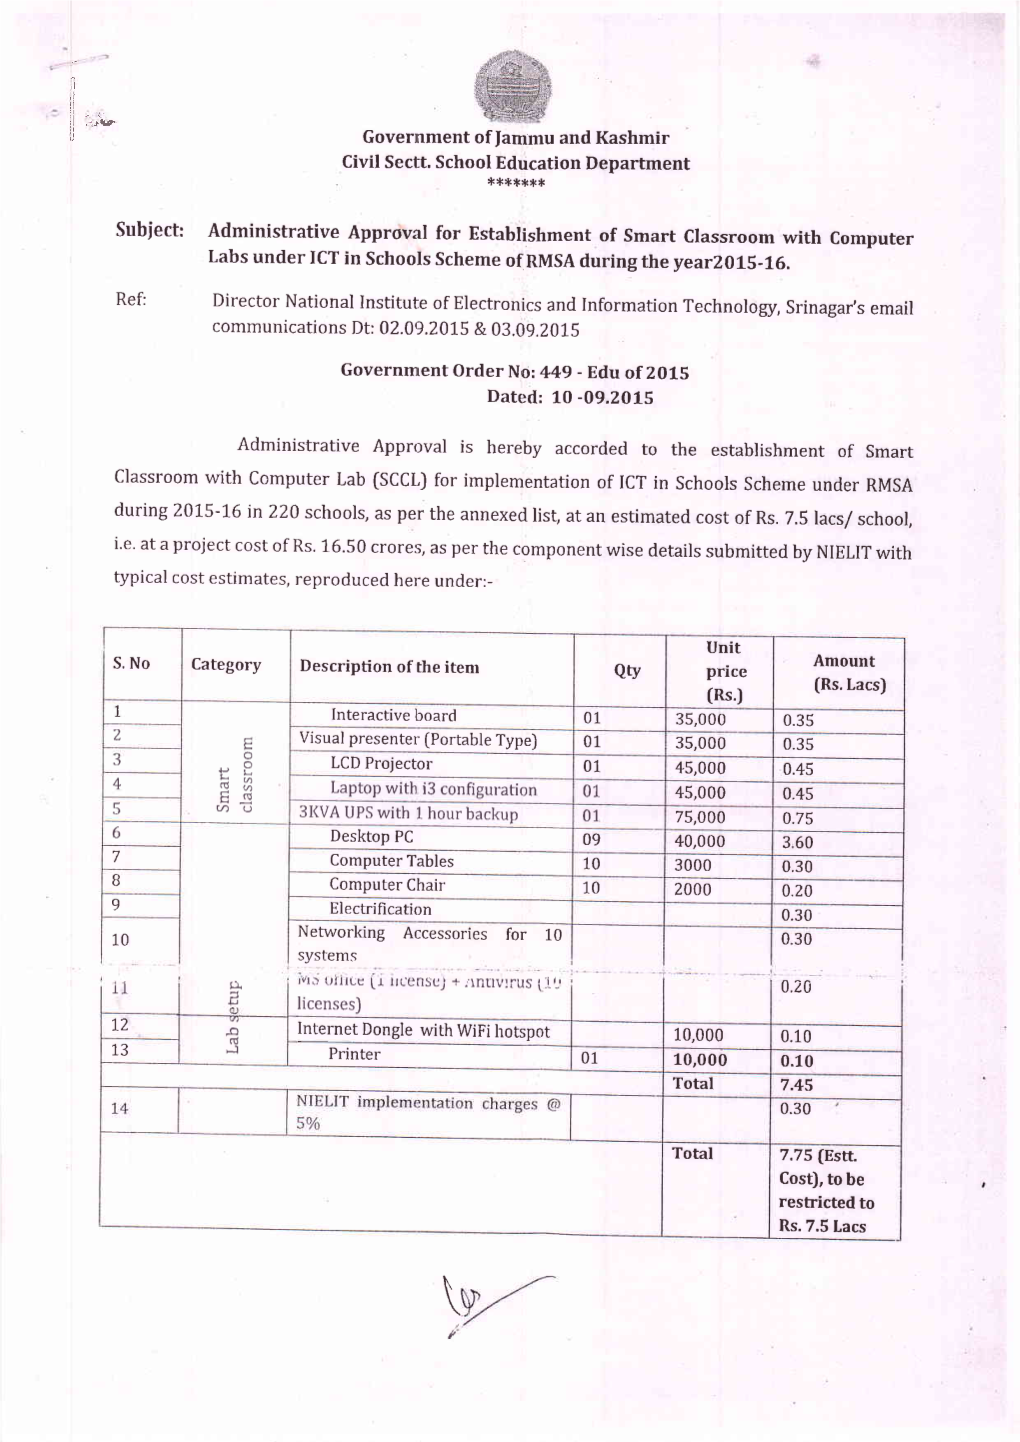 Subiect: Administrative Approval for Establishment of Smart Classroom with Computer Labs Under ICT in Schoors Scheme of RMSA During the Yearz0ls-16